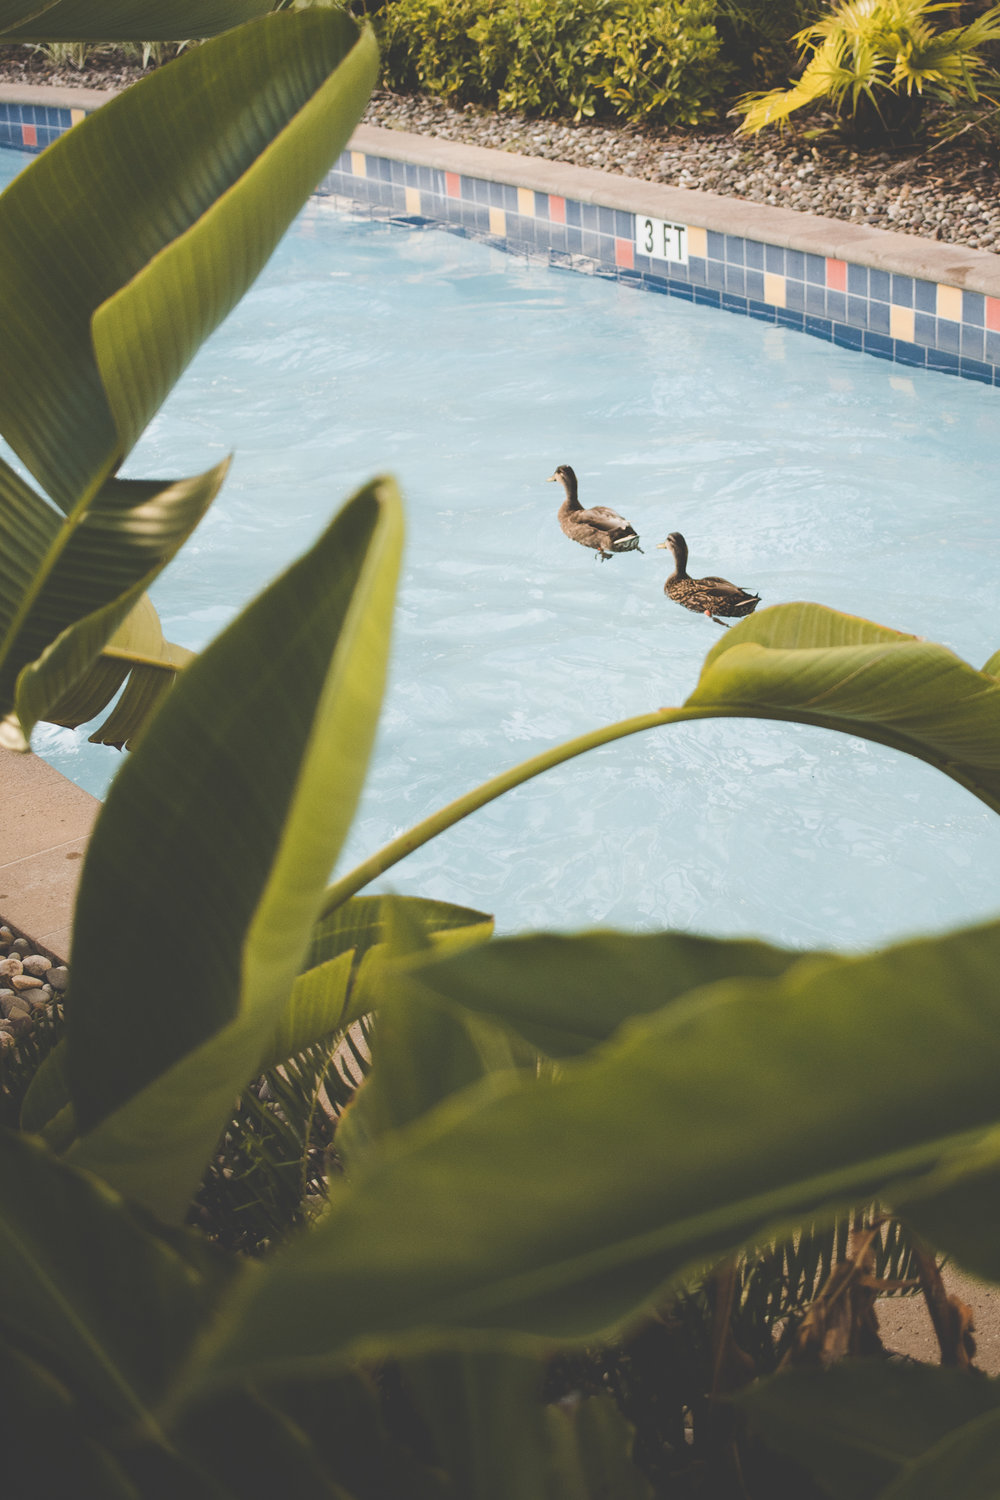  Even the ducks can enjoy the lazy river. Fun fact, the life guard said that all the ducks at Cabana Bay are named. 